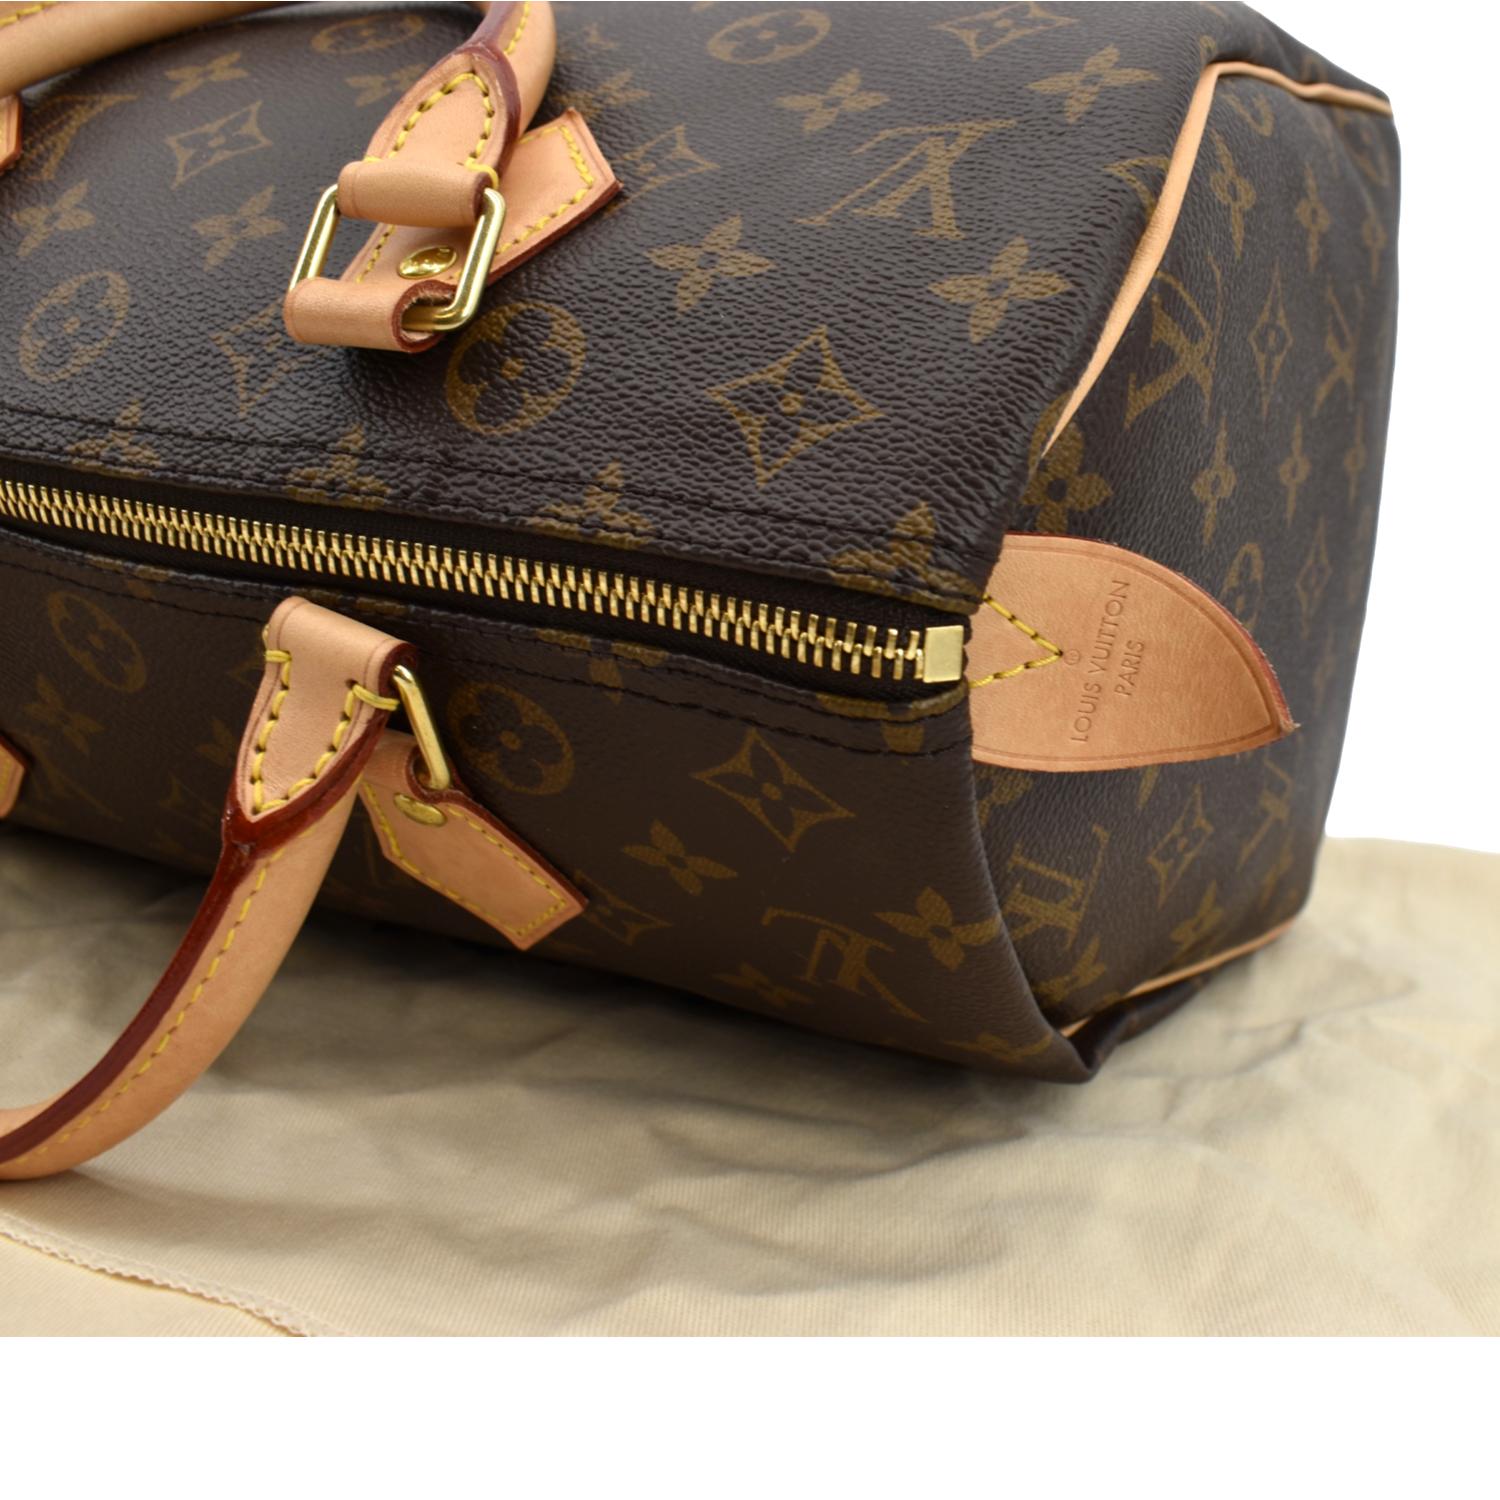 Louis Vuitton French Company Speedy Shoulder Bag 30 Brown Canvas